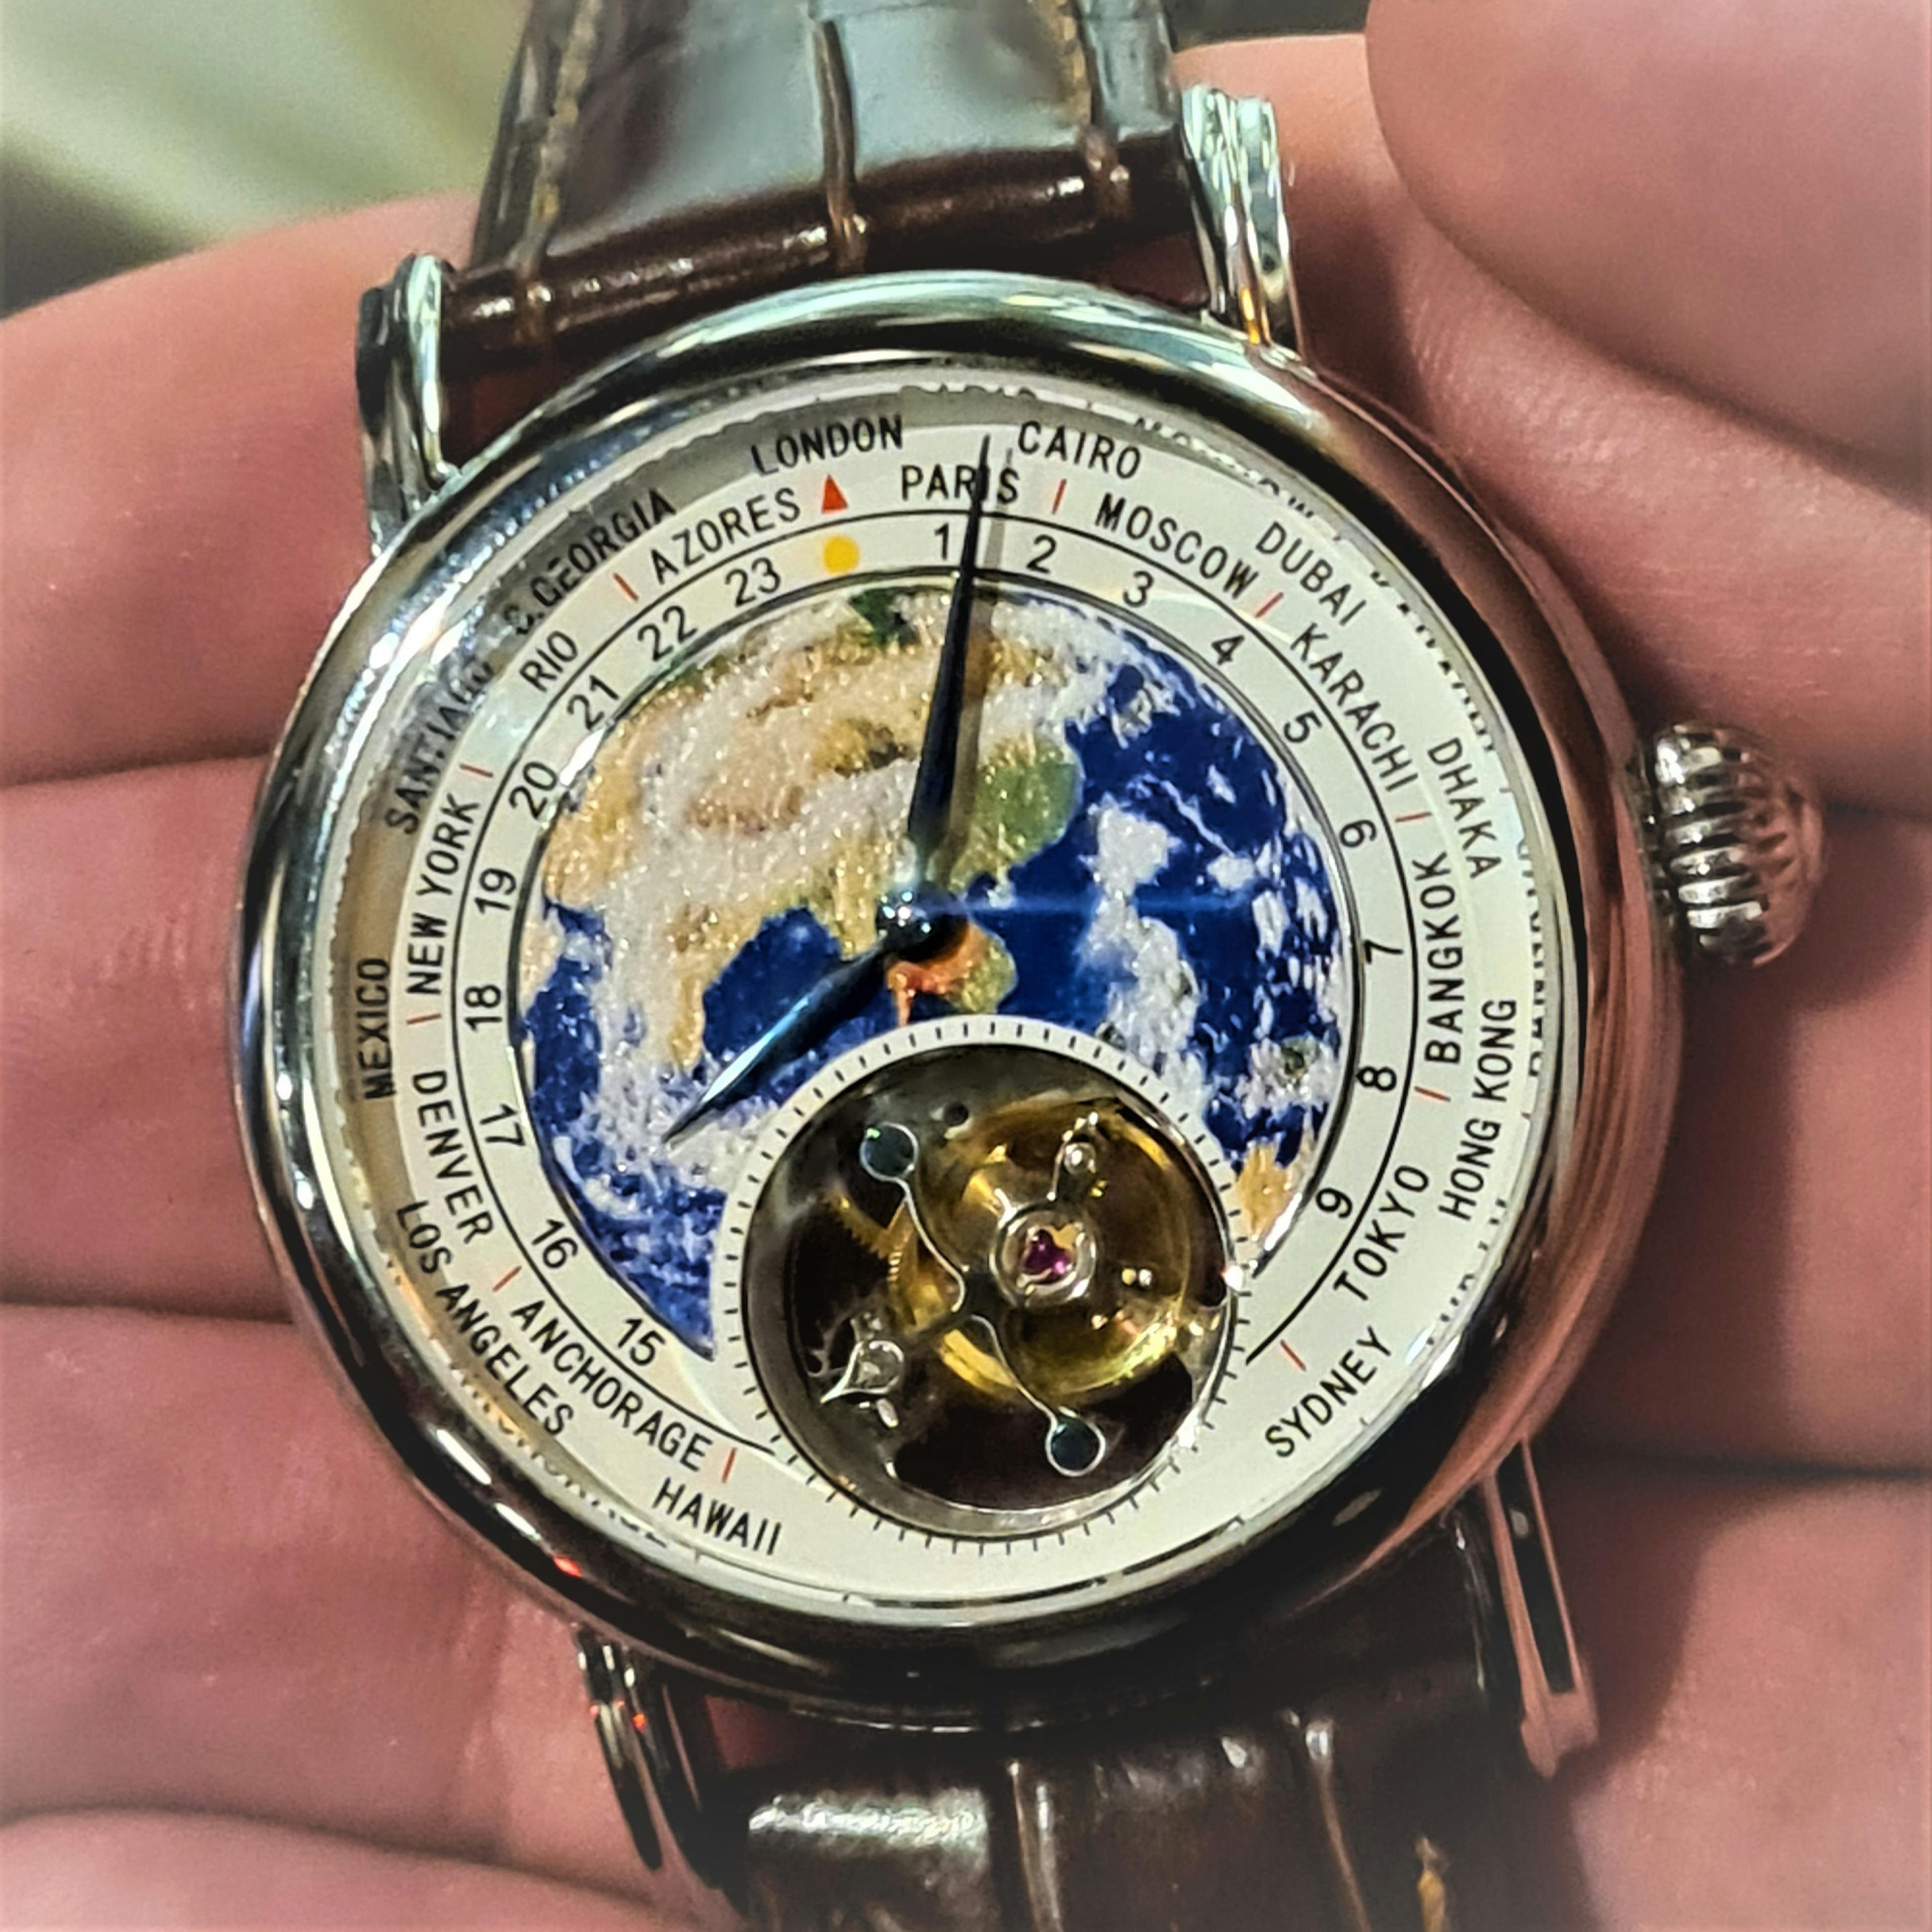 Modern Seagull watch wtih Tourbillon at the bottom. The Escapement rotates within the visible circle in order to offset the effects of gravity on the Balance.